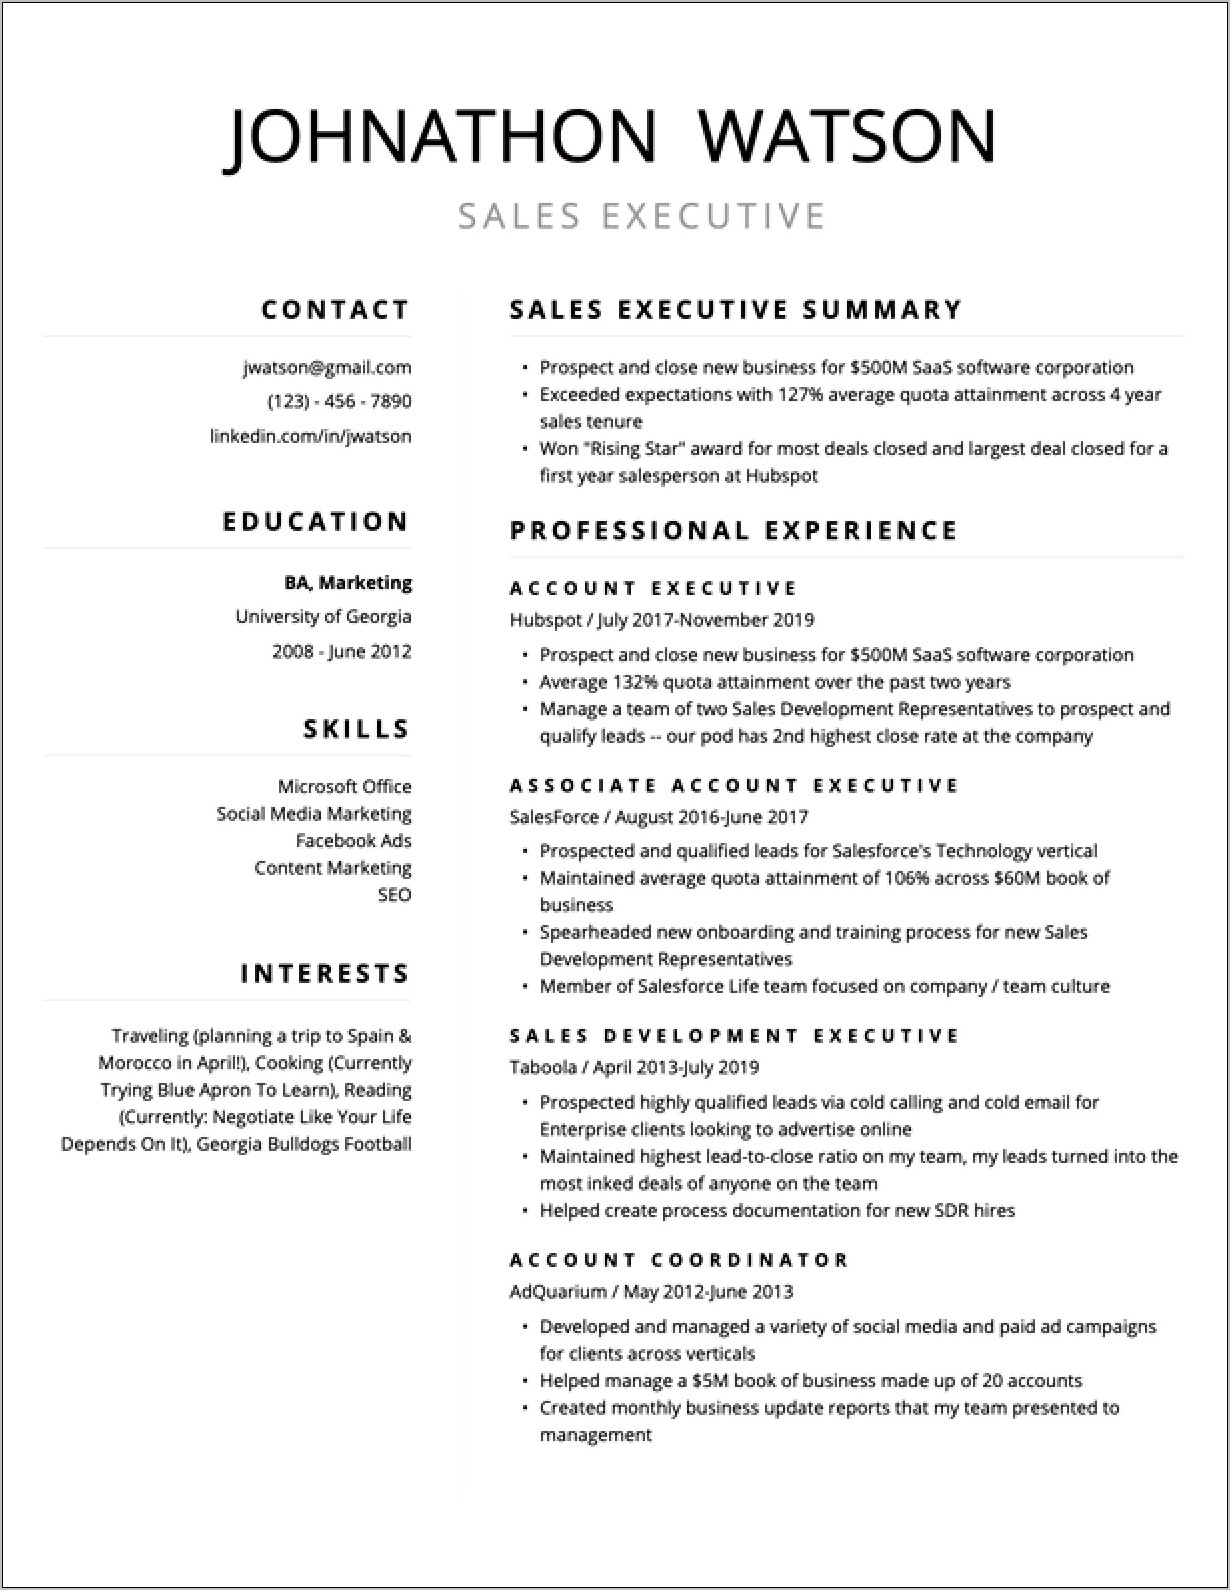 Jobs At Companies That Help Write Resumes